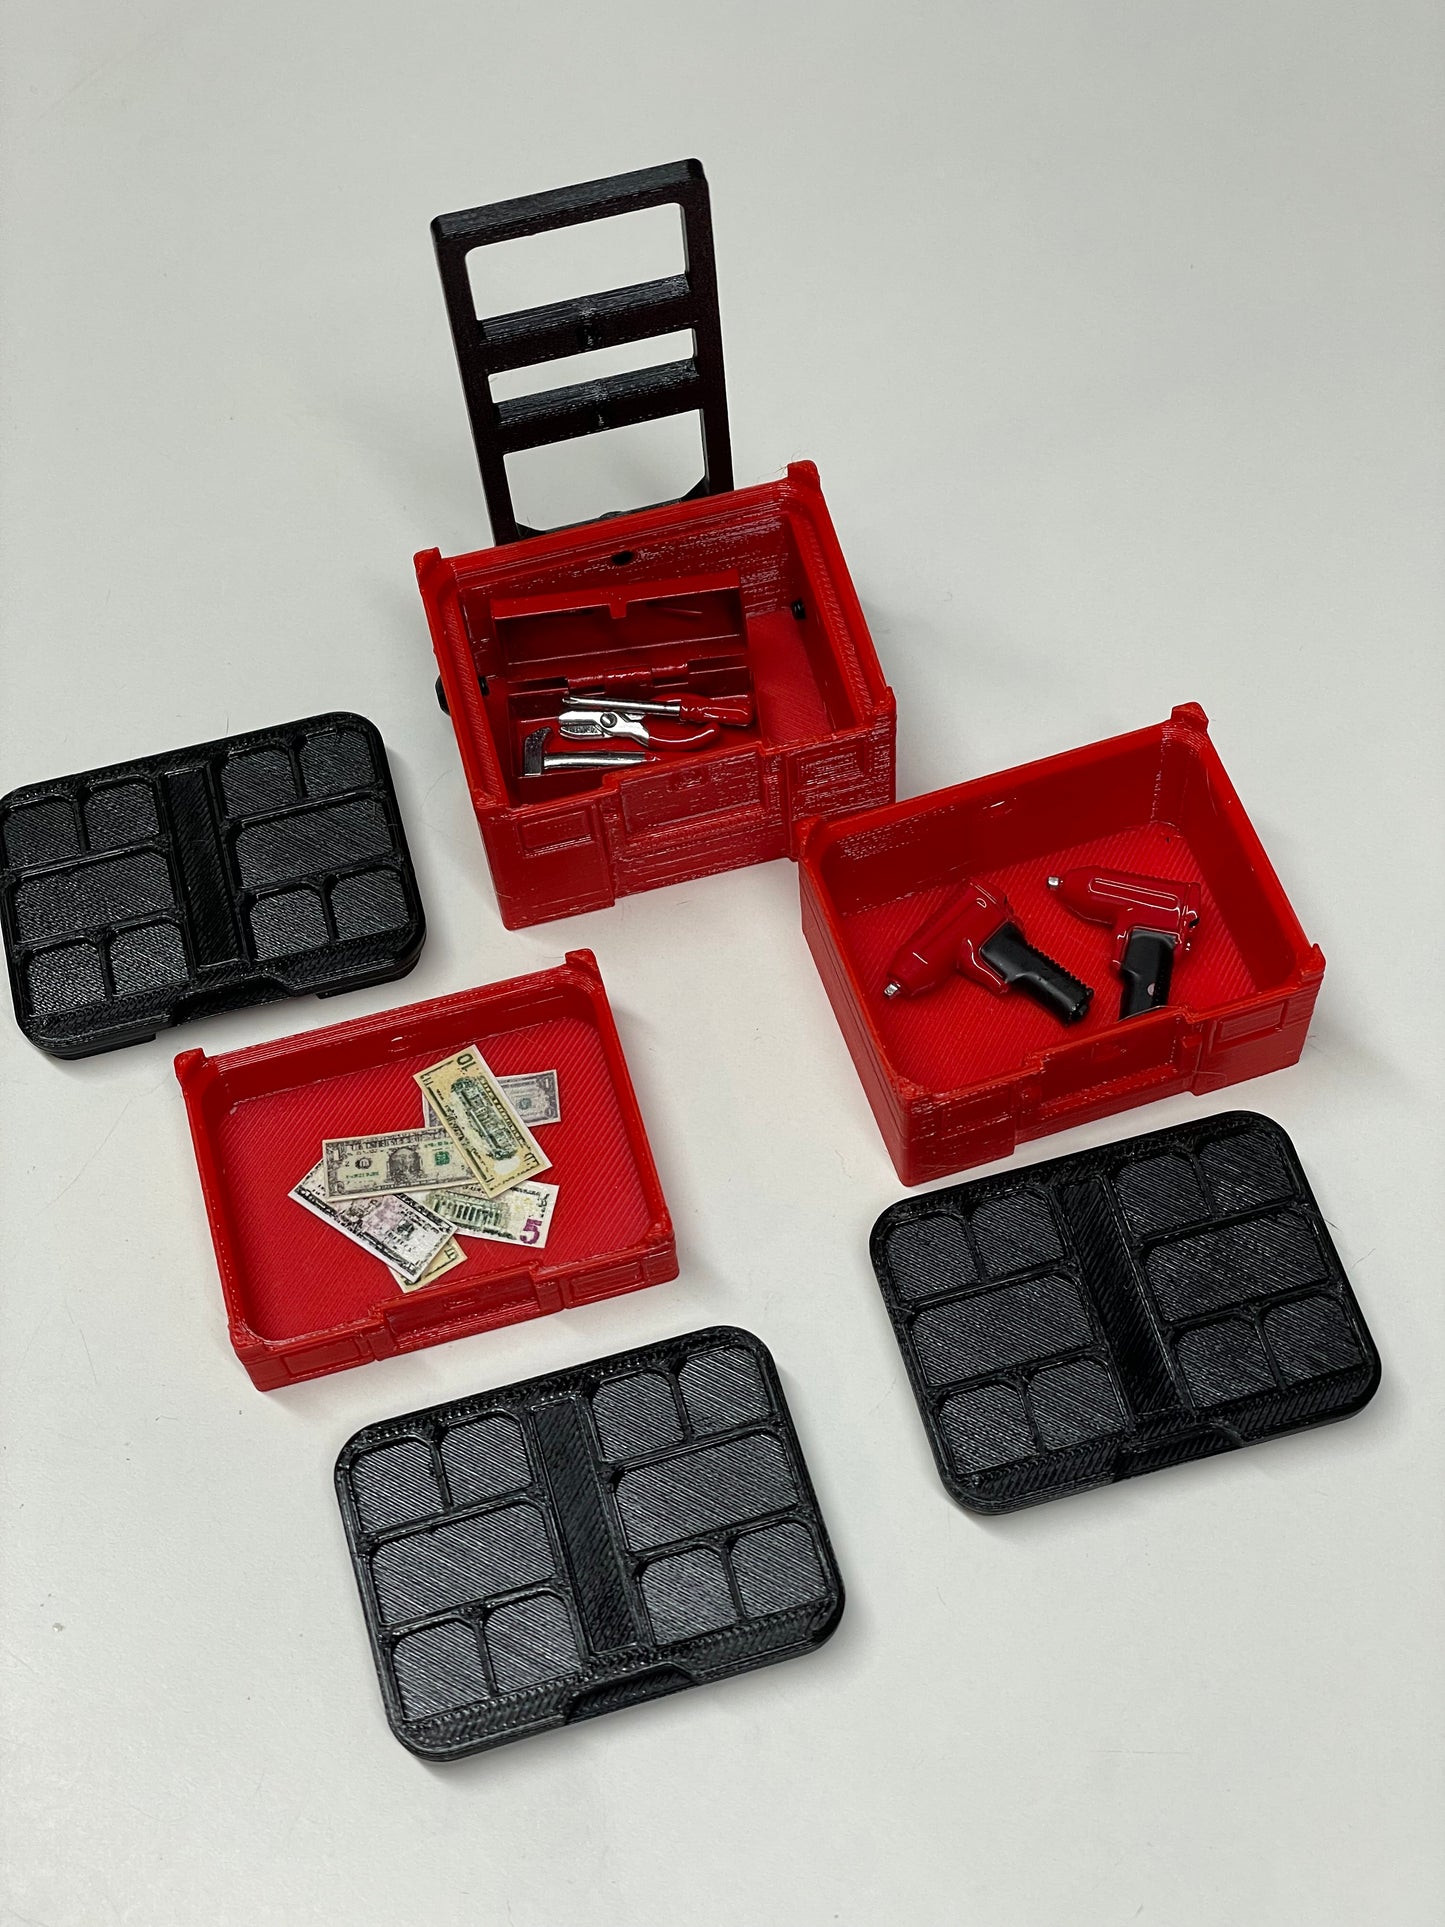 1/10 Scale “Pack Out” Tool Boxes for Scale Garage Diorama